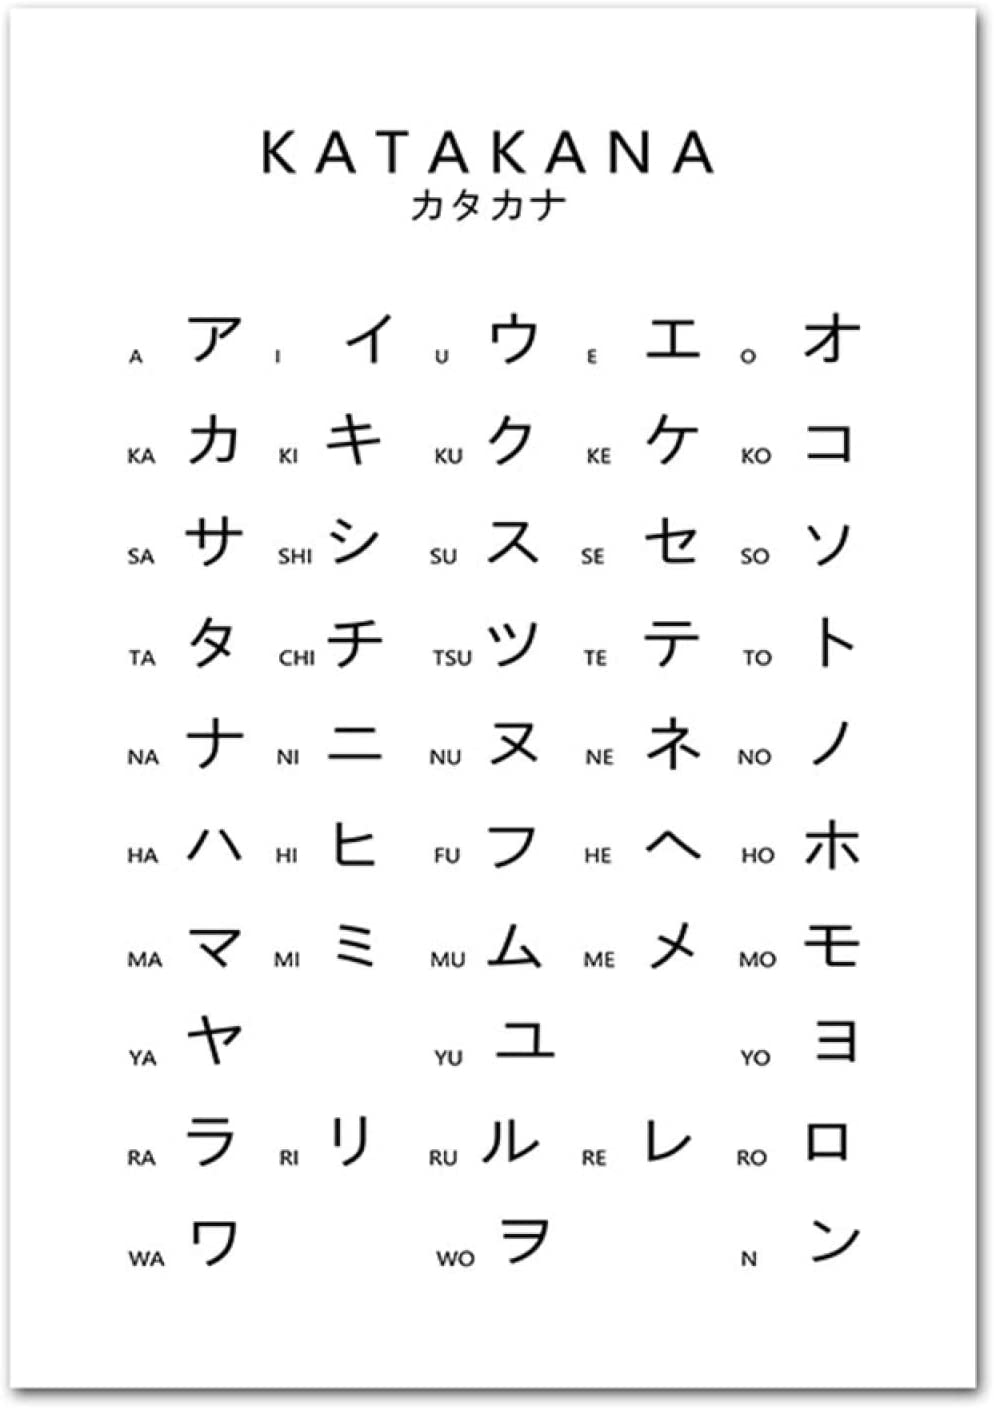 Amazon.co.jp: Black and White Canvas Wall Art Katakana Chart Japanese Alphabet Poster Canvas Print Painting Students Education Decor Picture 15.7x19.6(40x50cm) Unframed, Home & Kitchen